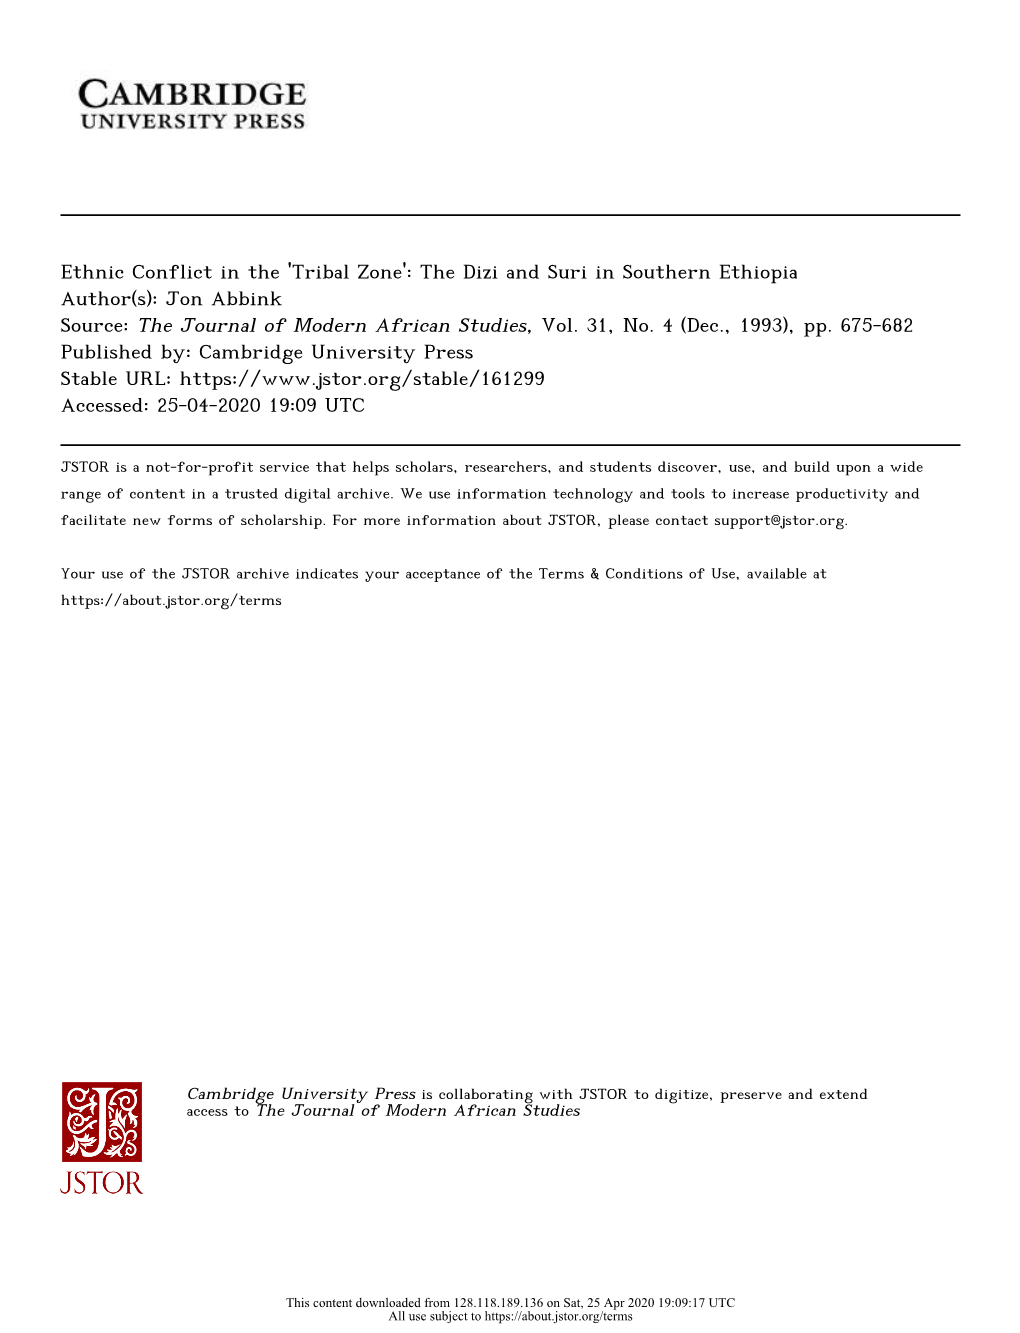 Ethnic Conflict in the 'Tribal Zone': the Dizi and Suri in Southern Ethiopia Author(S): Jon Abbink Source: the Journal of Modern African Studies, Vol